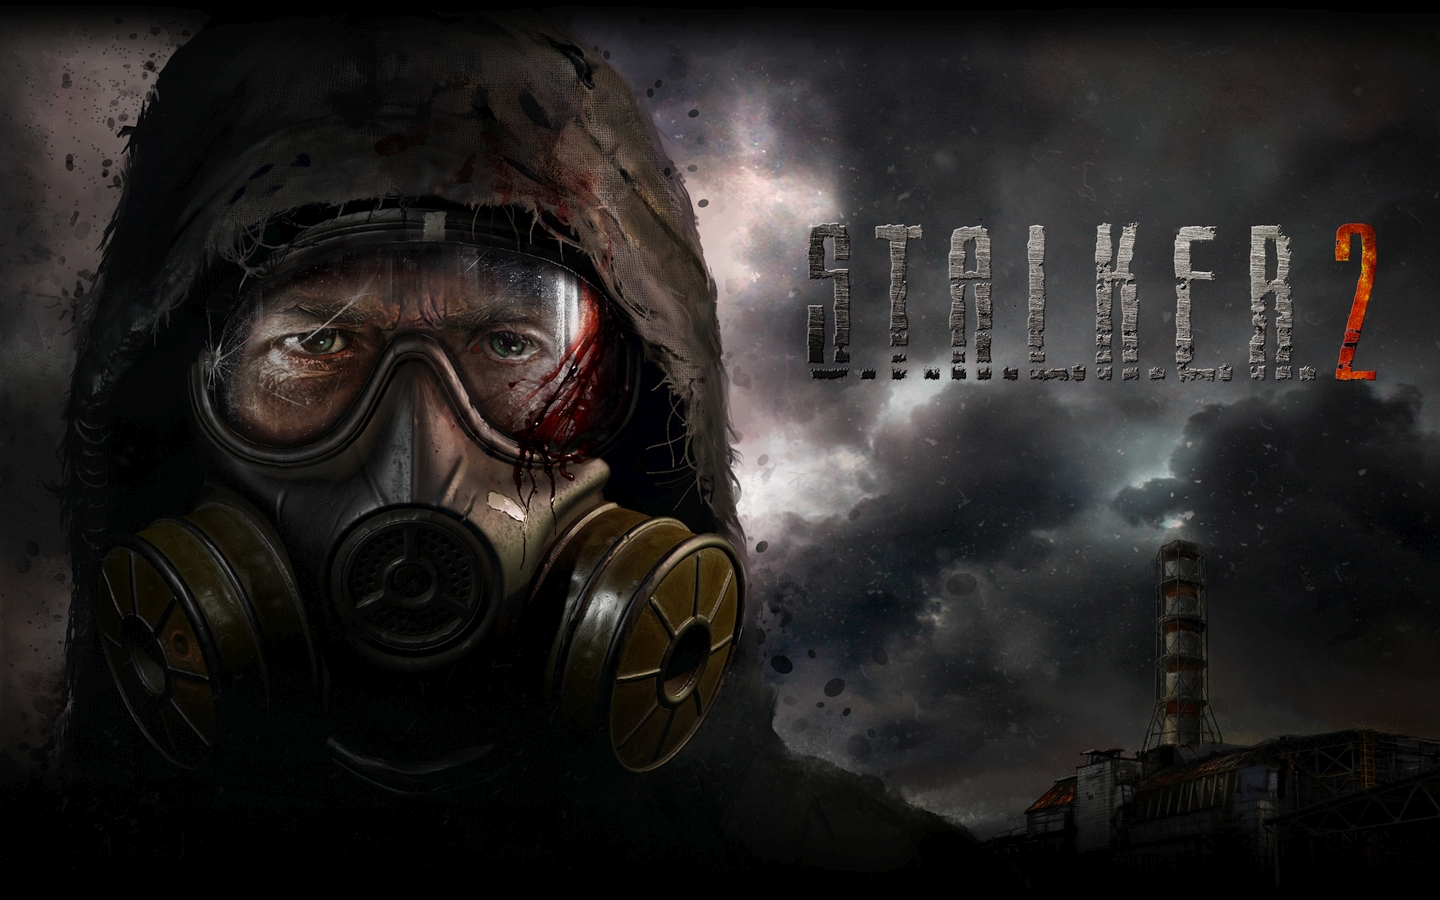 GSC Game World Reveals S.T.A.L.K.E.R. 2 Will Be Powered By Unreal Engine